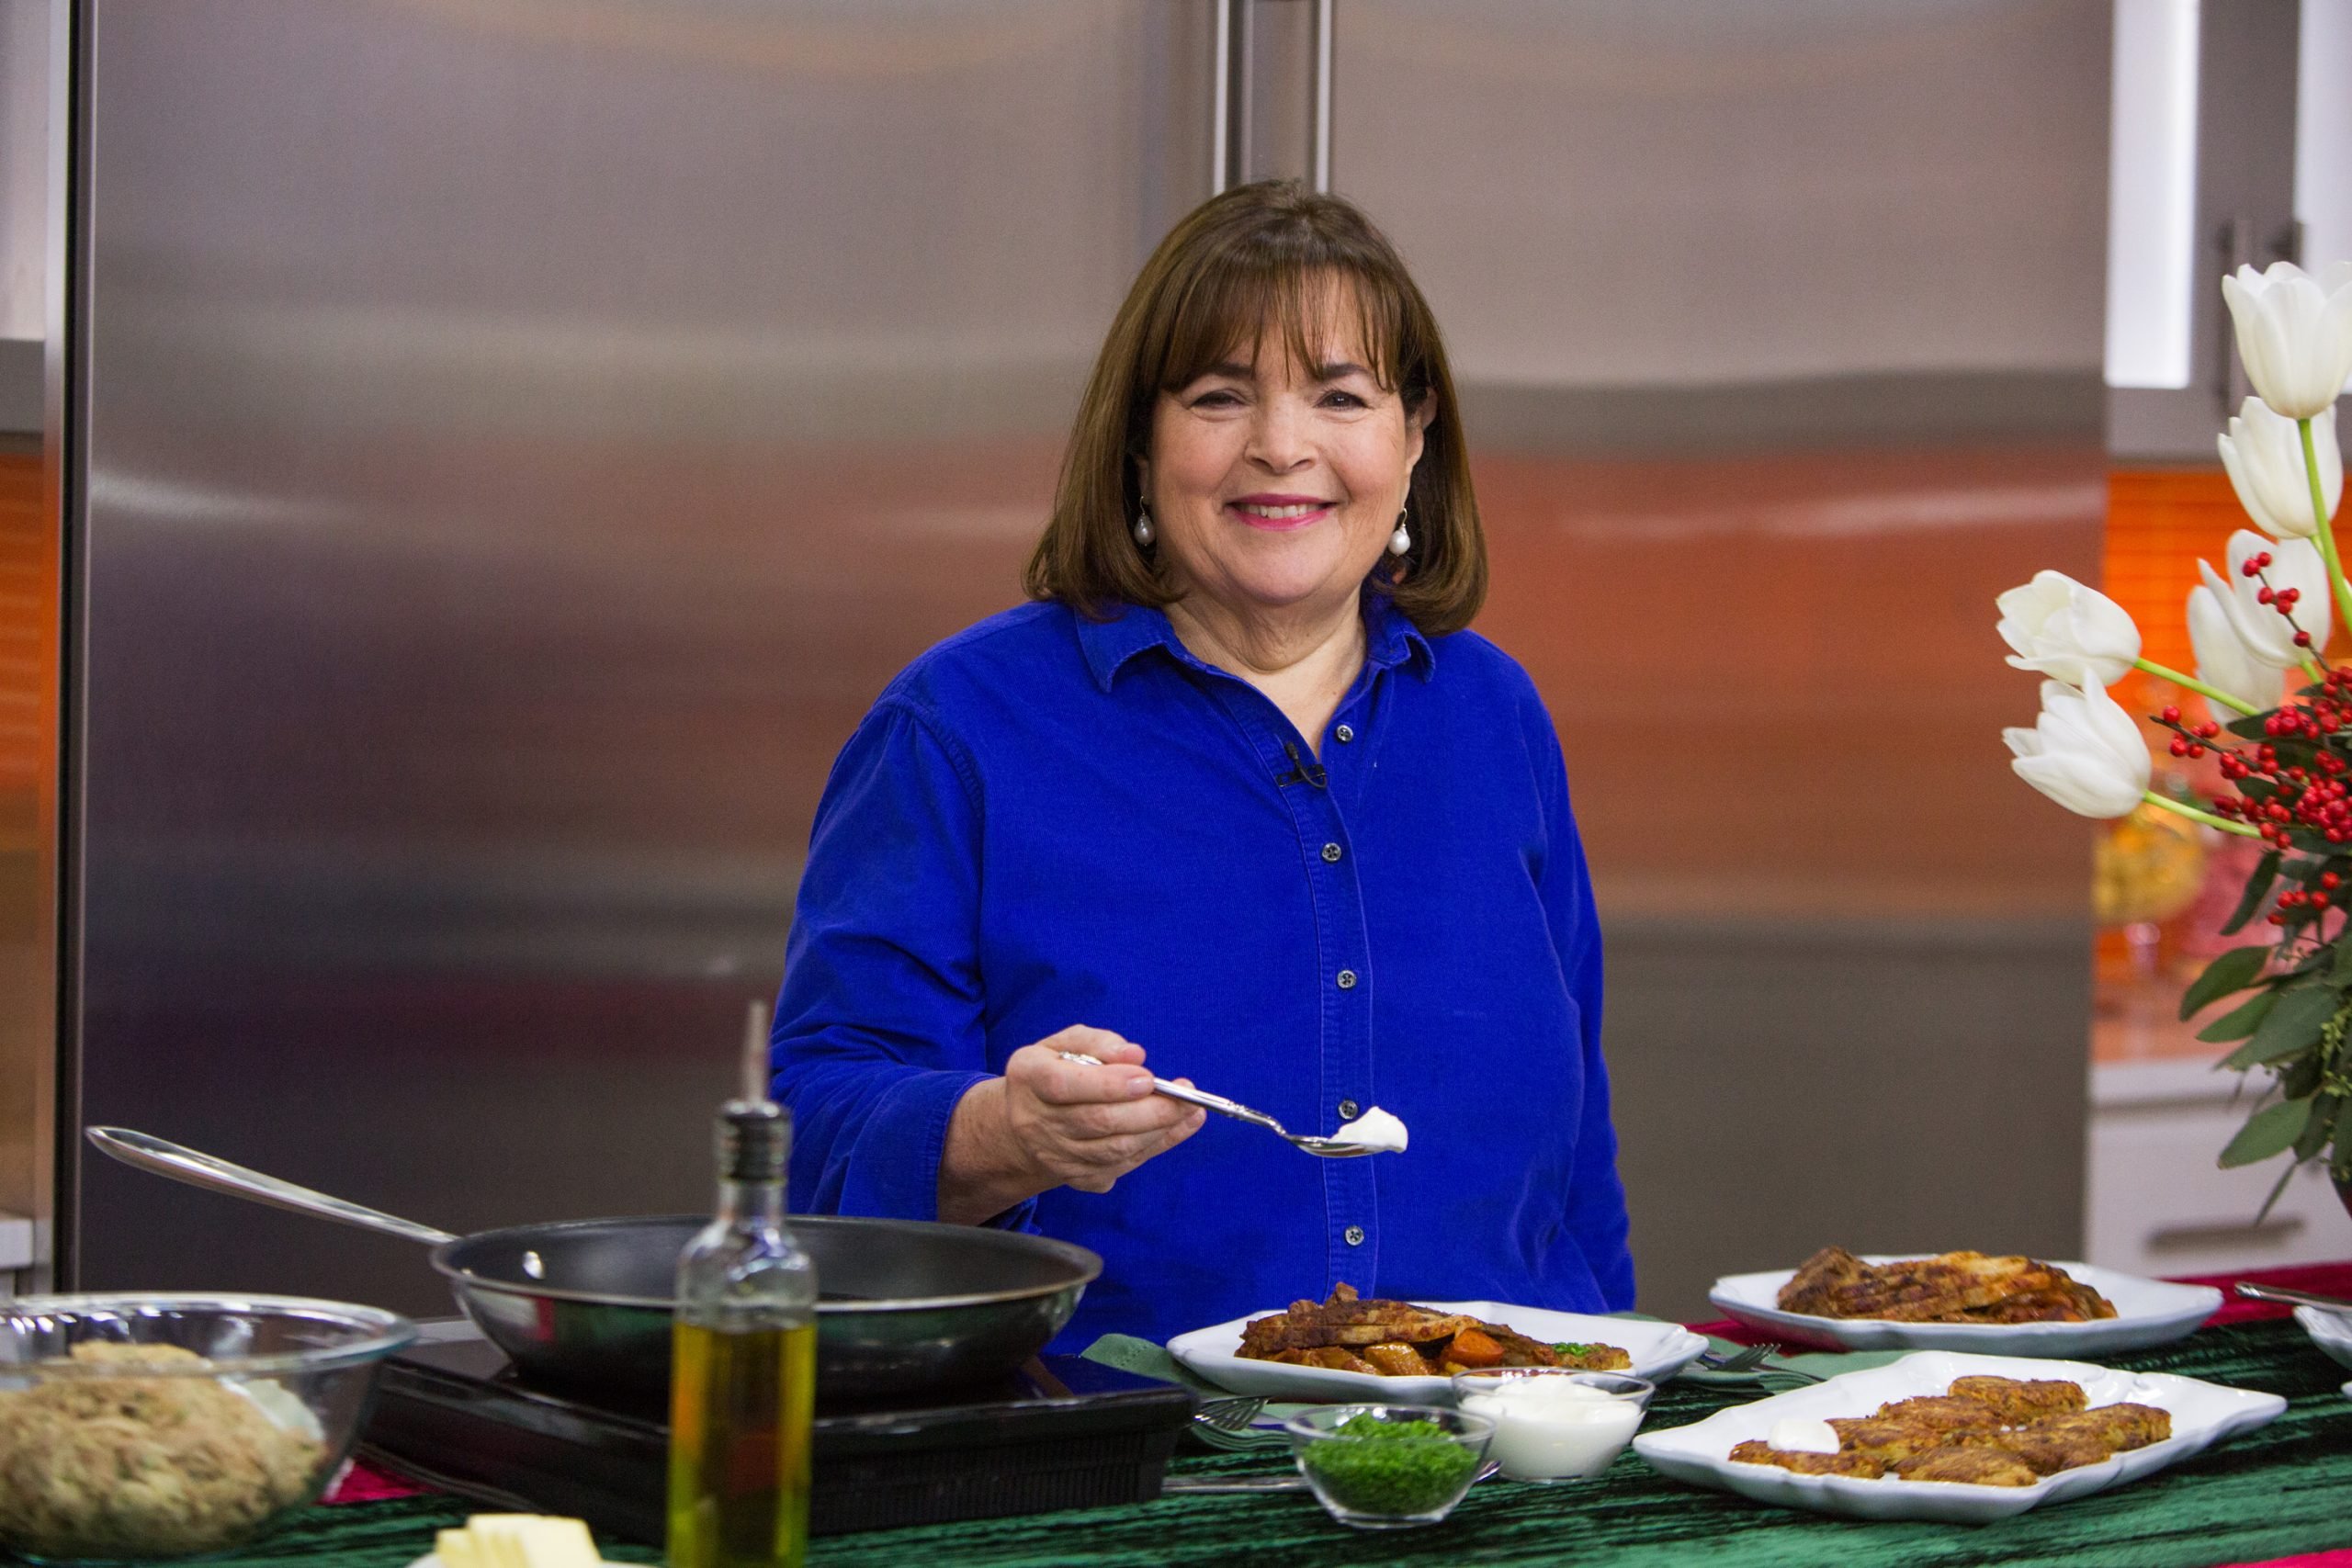 Barefoot Contessa' Ina Garten Says We Should Throw Out This